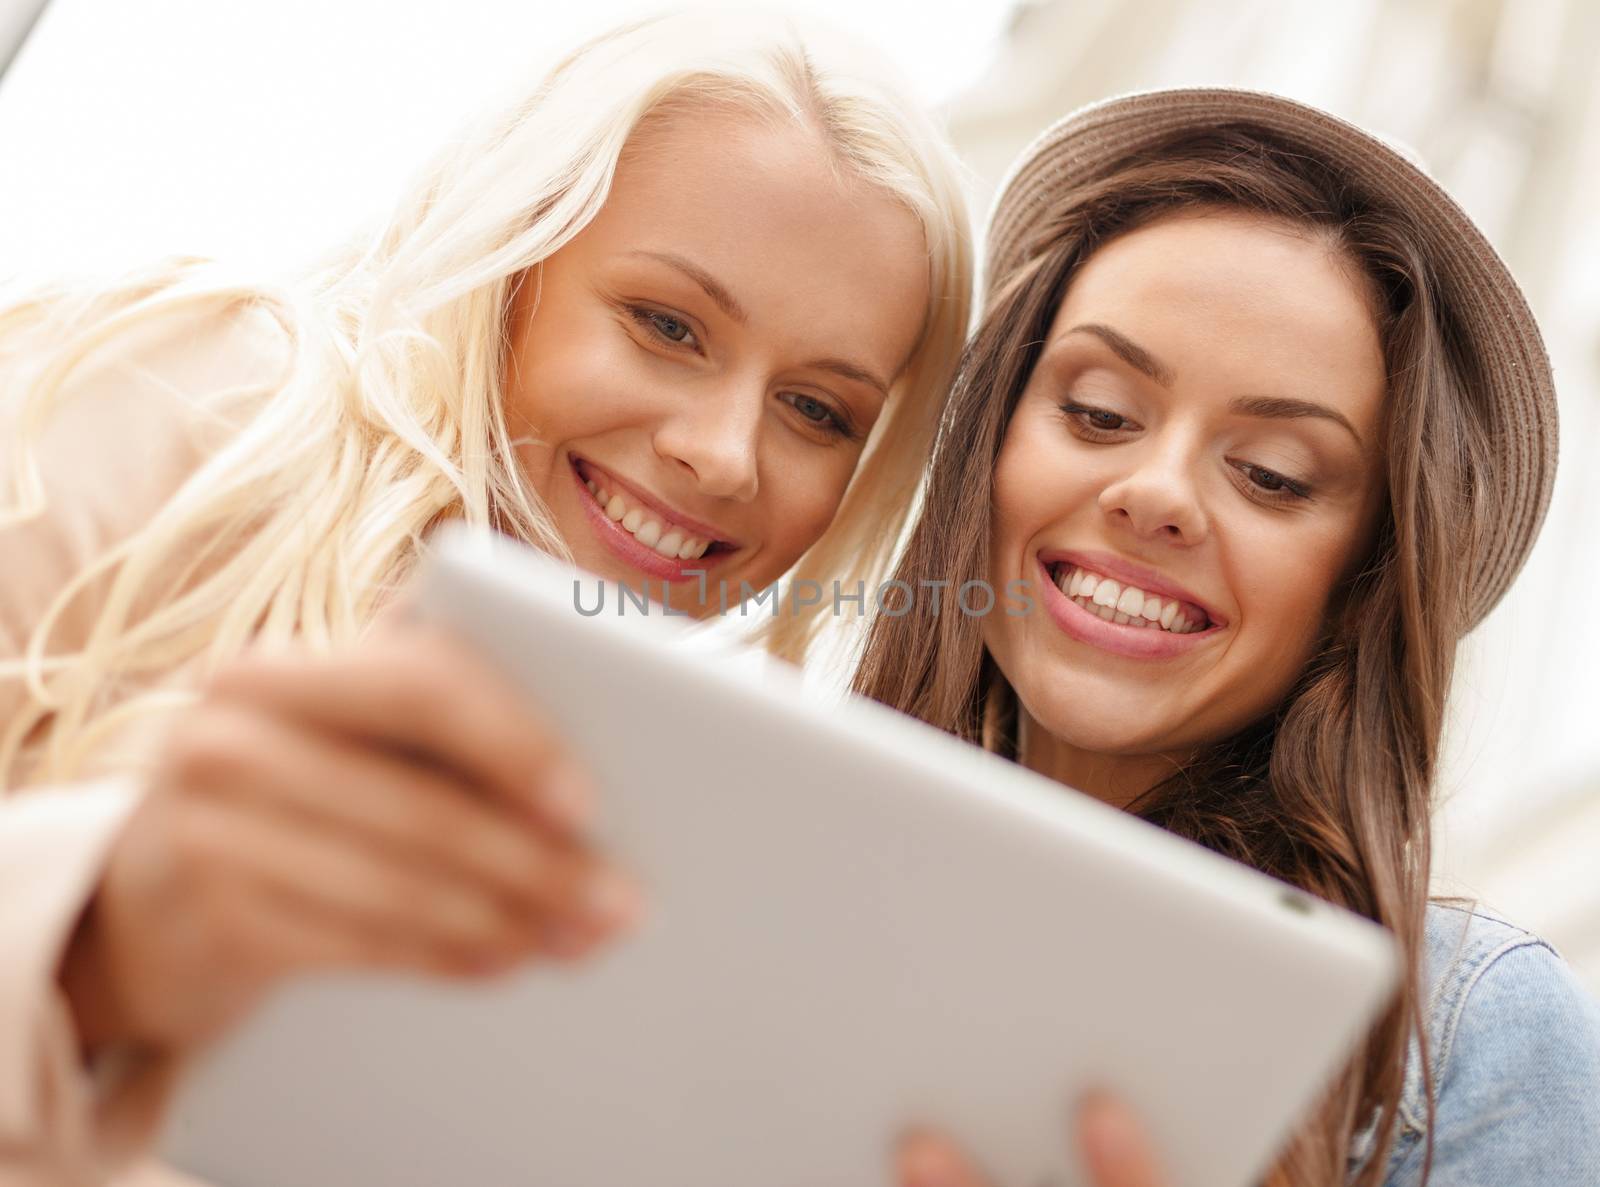 holidays, technology and tourism concept - two beautiful girls toursits looking into tablet pc in the city